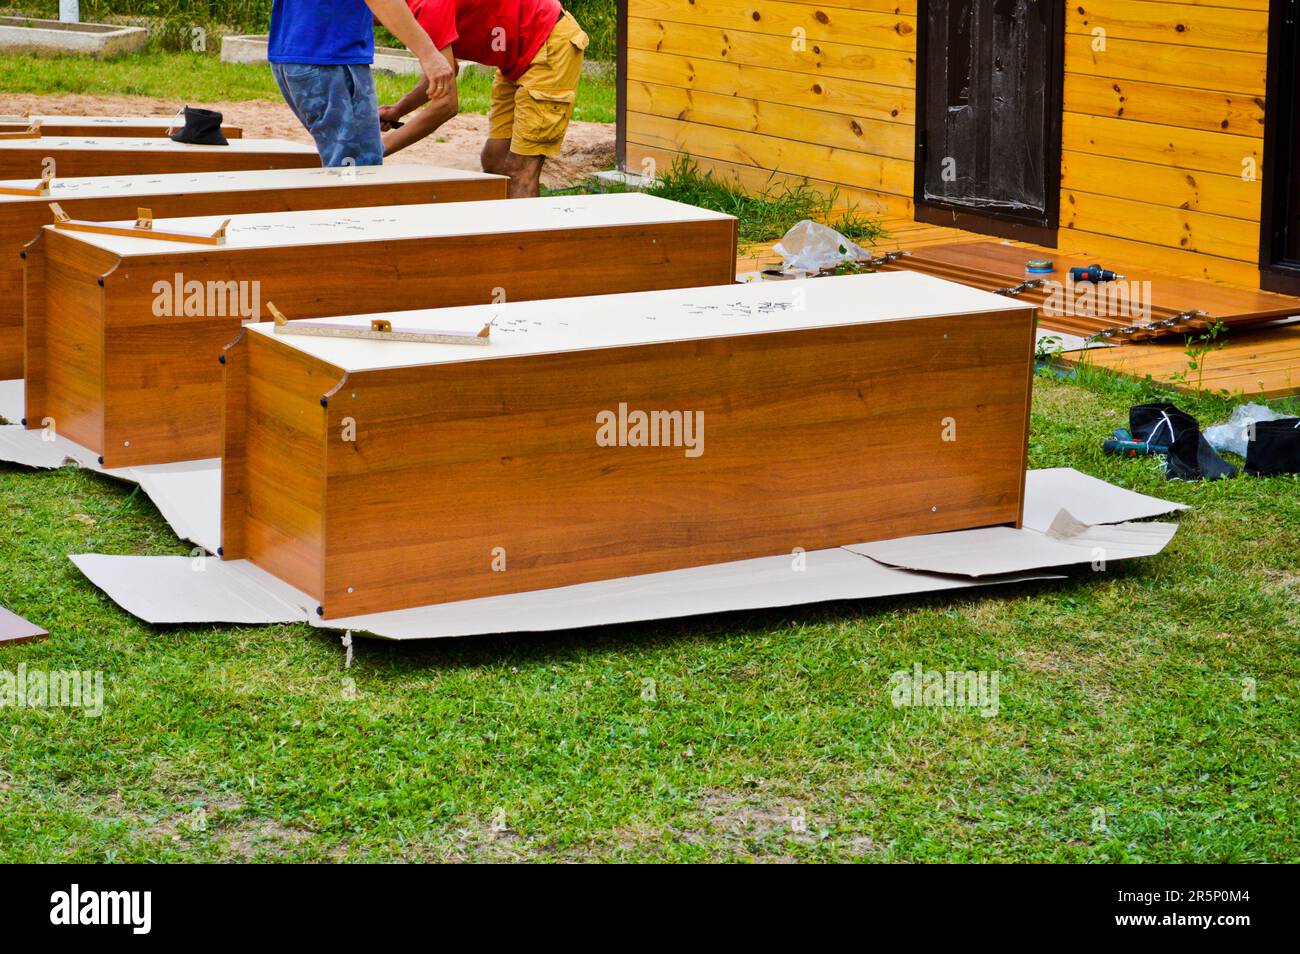 Workers assemble new wooden cabinets furniture in the street. Stock Photo